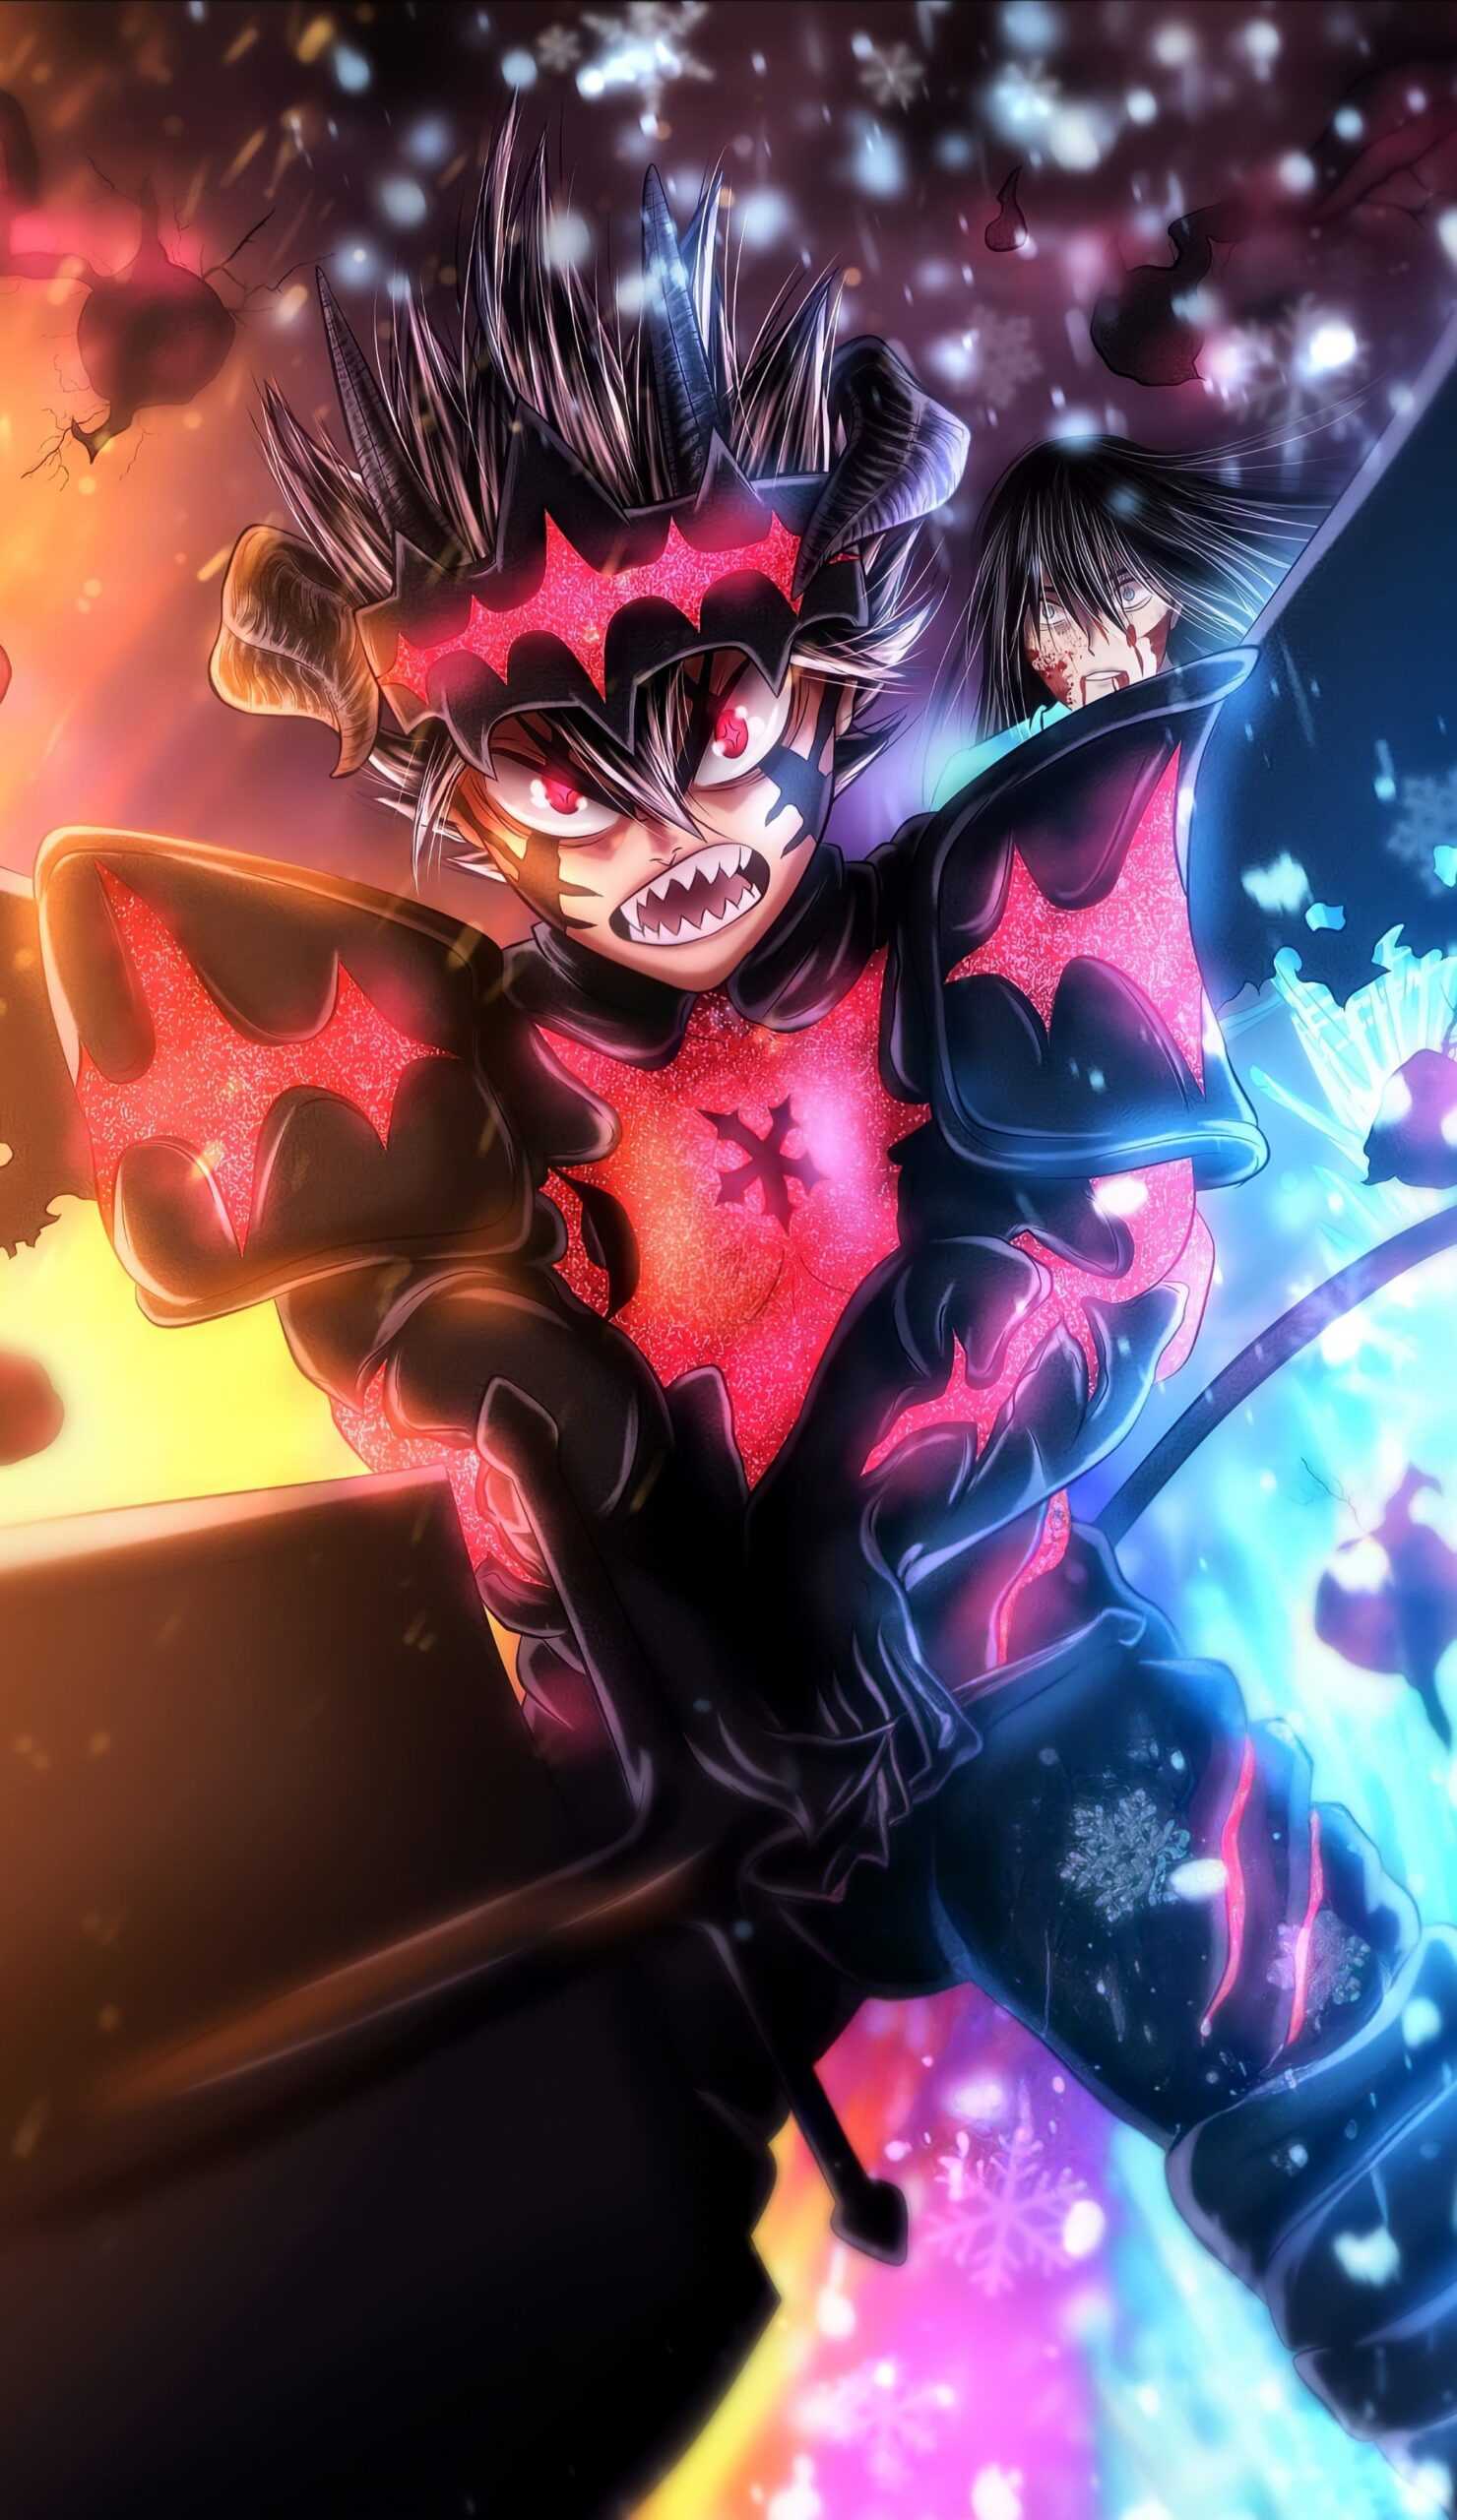 Download Asta (Black Clover) wallpapers for mobile phone, free